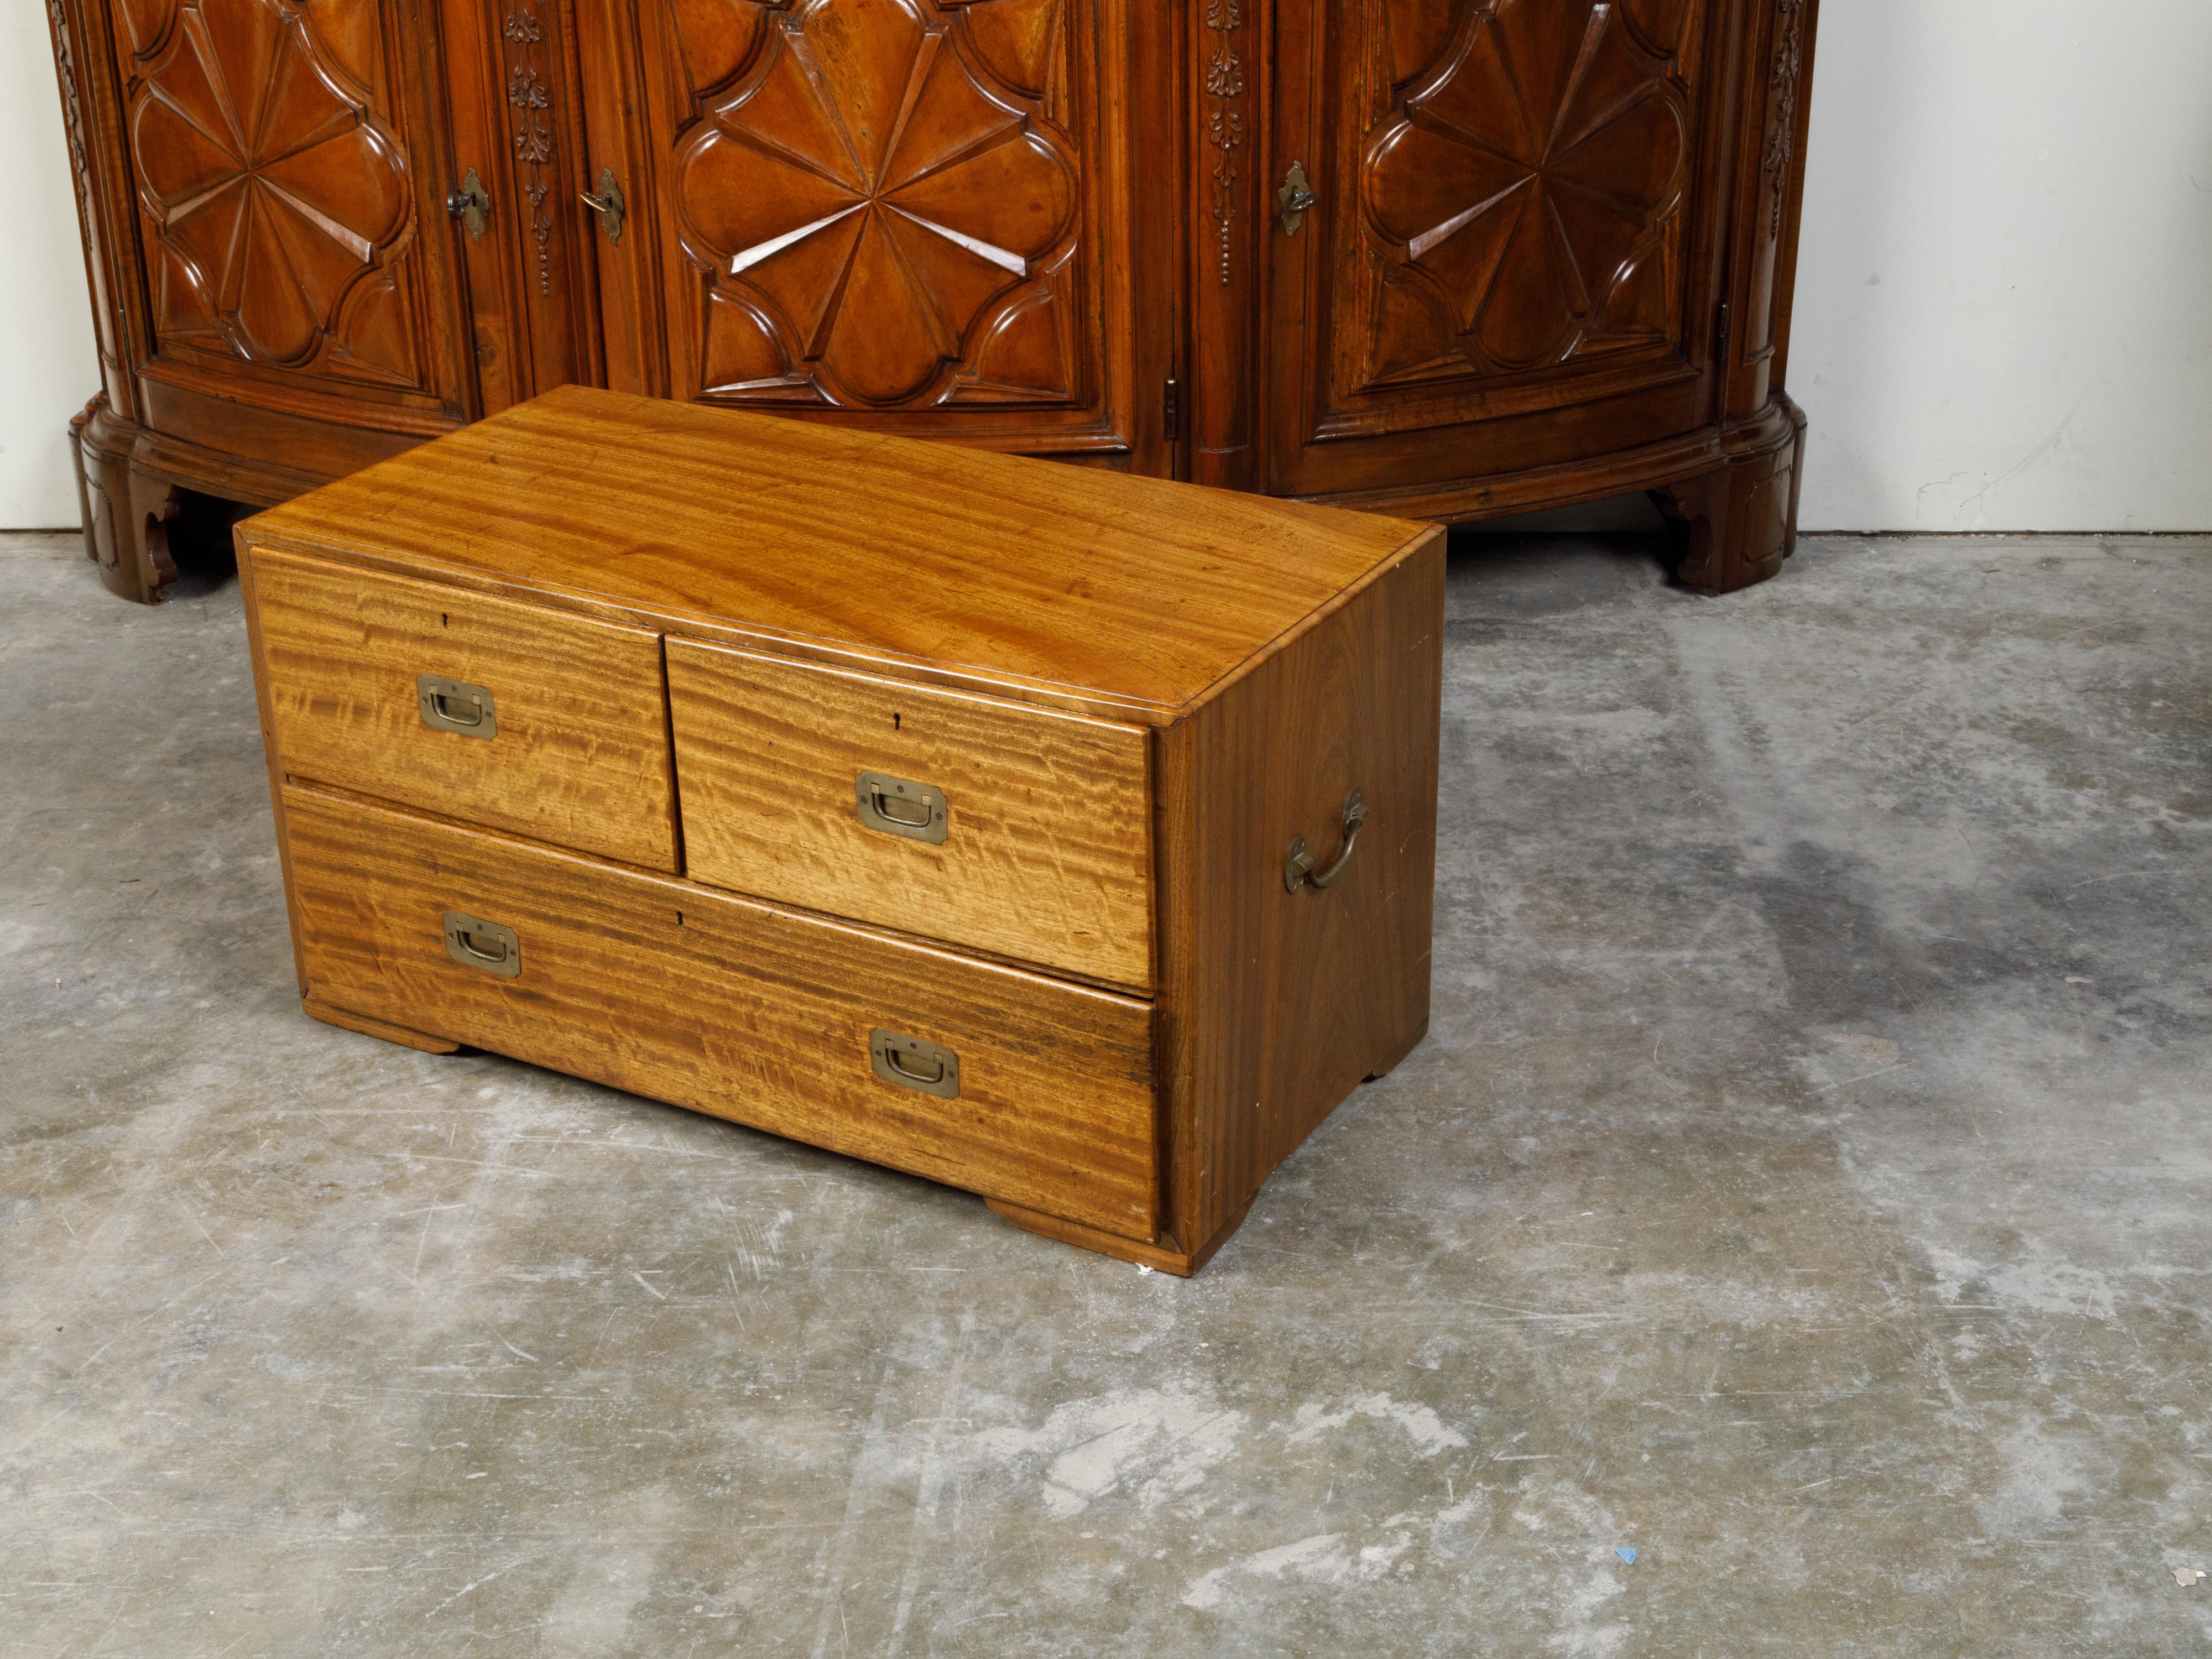 English Campaign 19th Century Camphor Wood Low Chest with Inset Brass Hardware For Sale 1